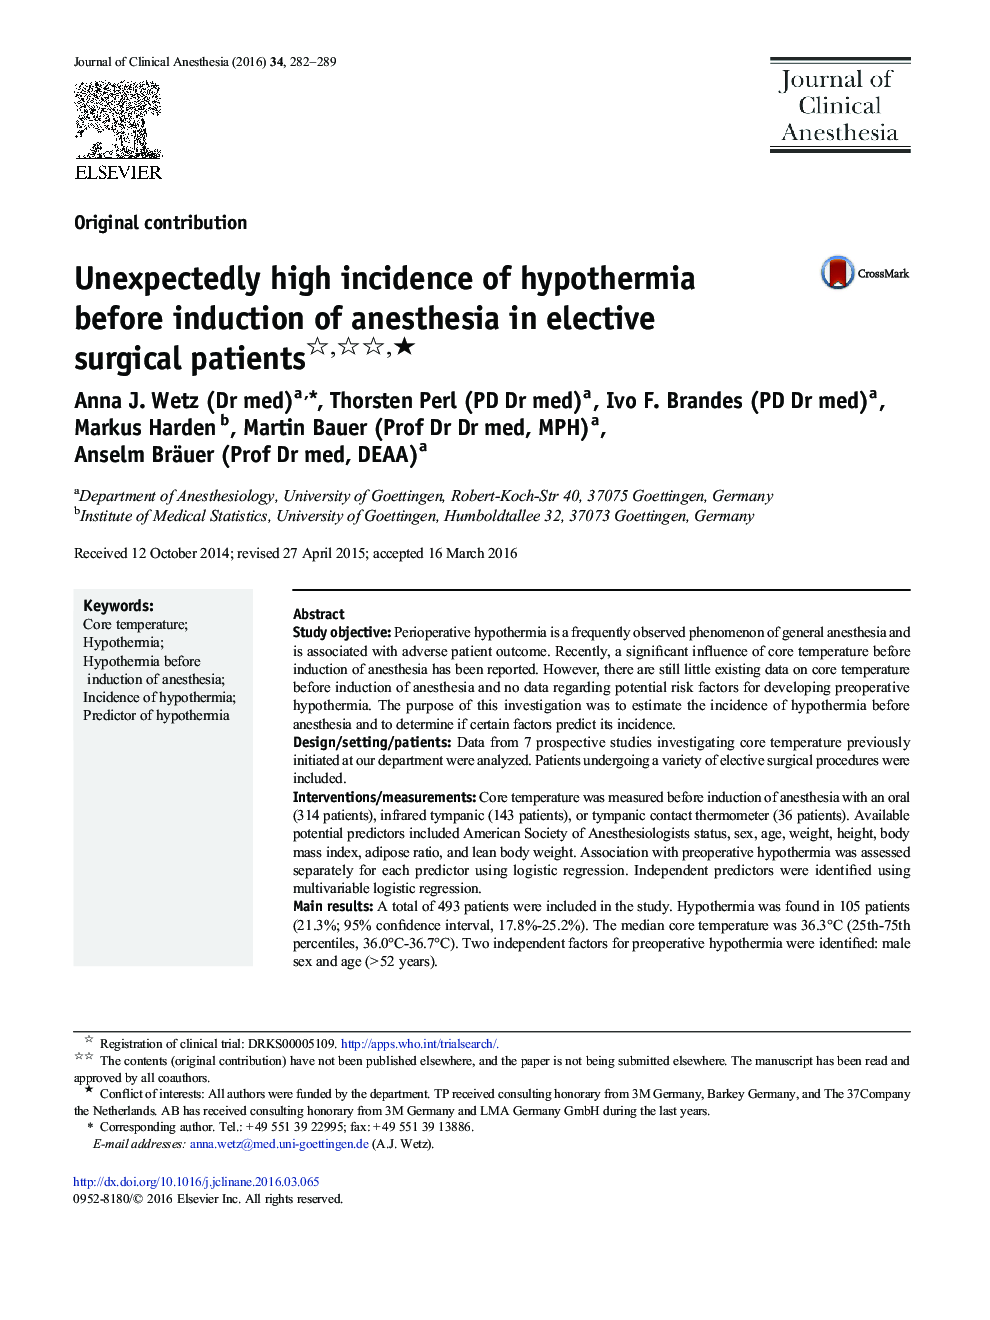 Unexpectedly high incidence of hypothermia before induction of anesthesia in elective surgical patients